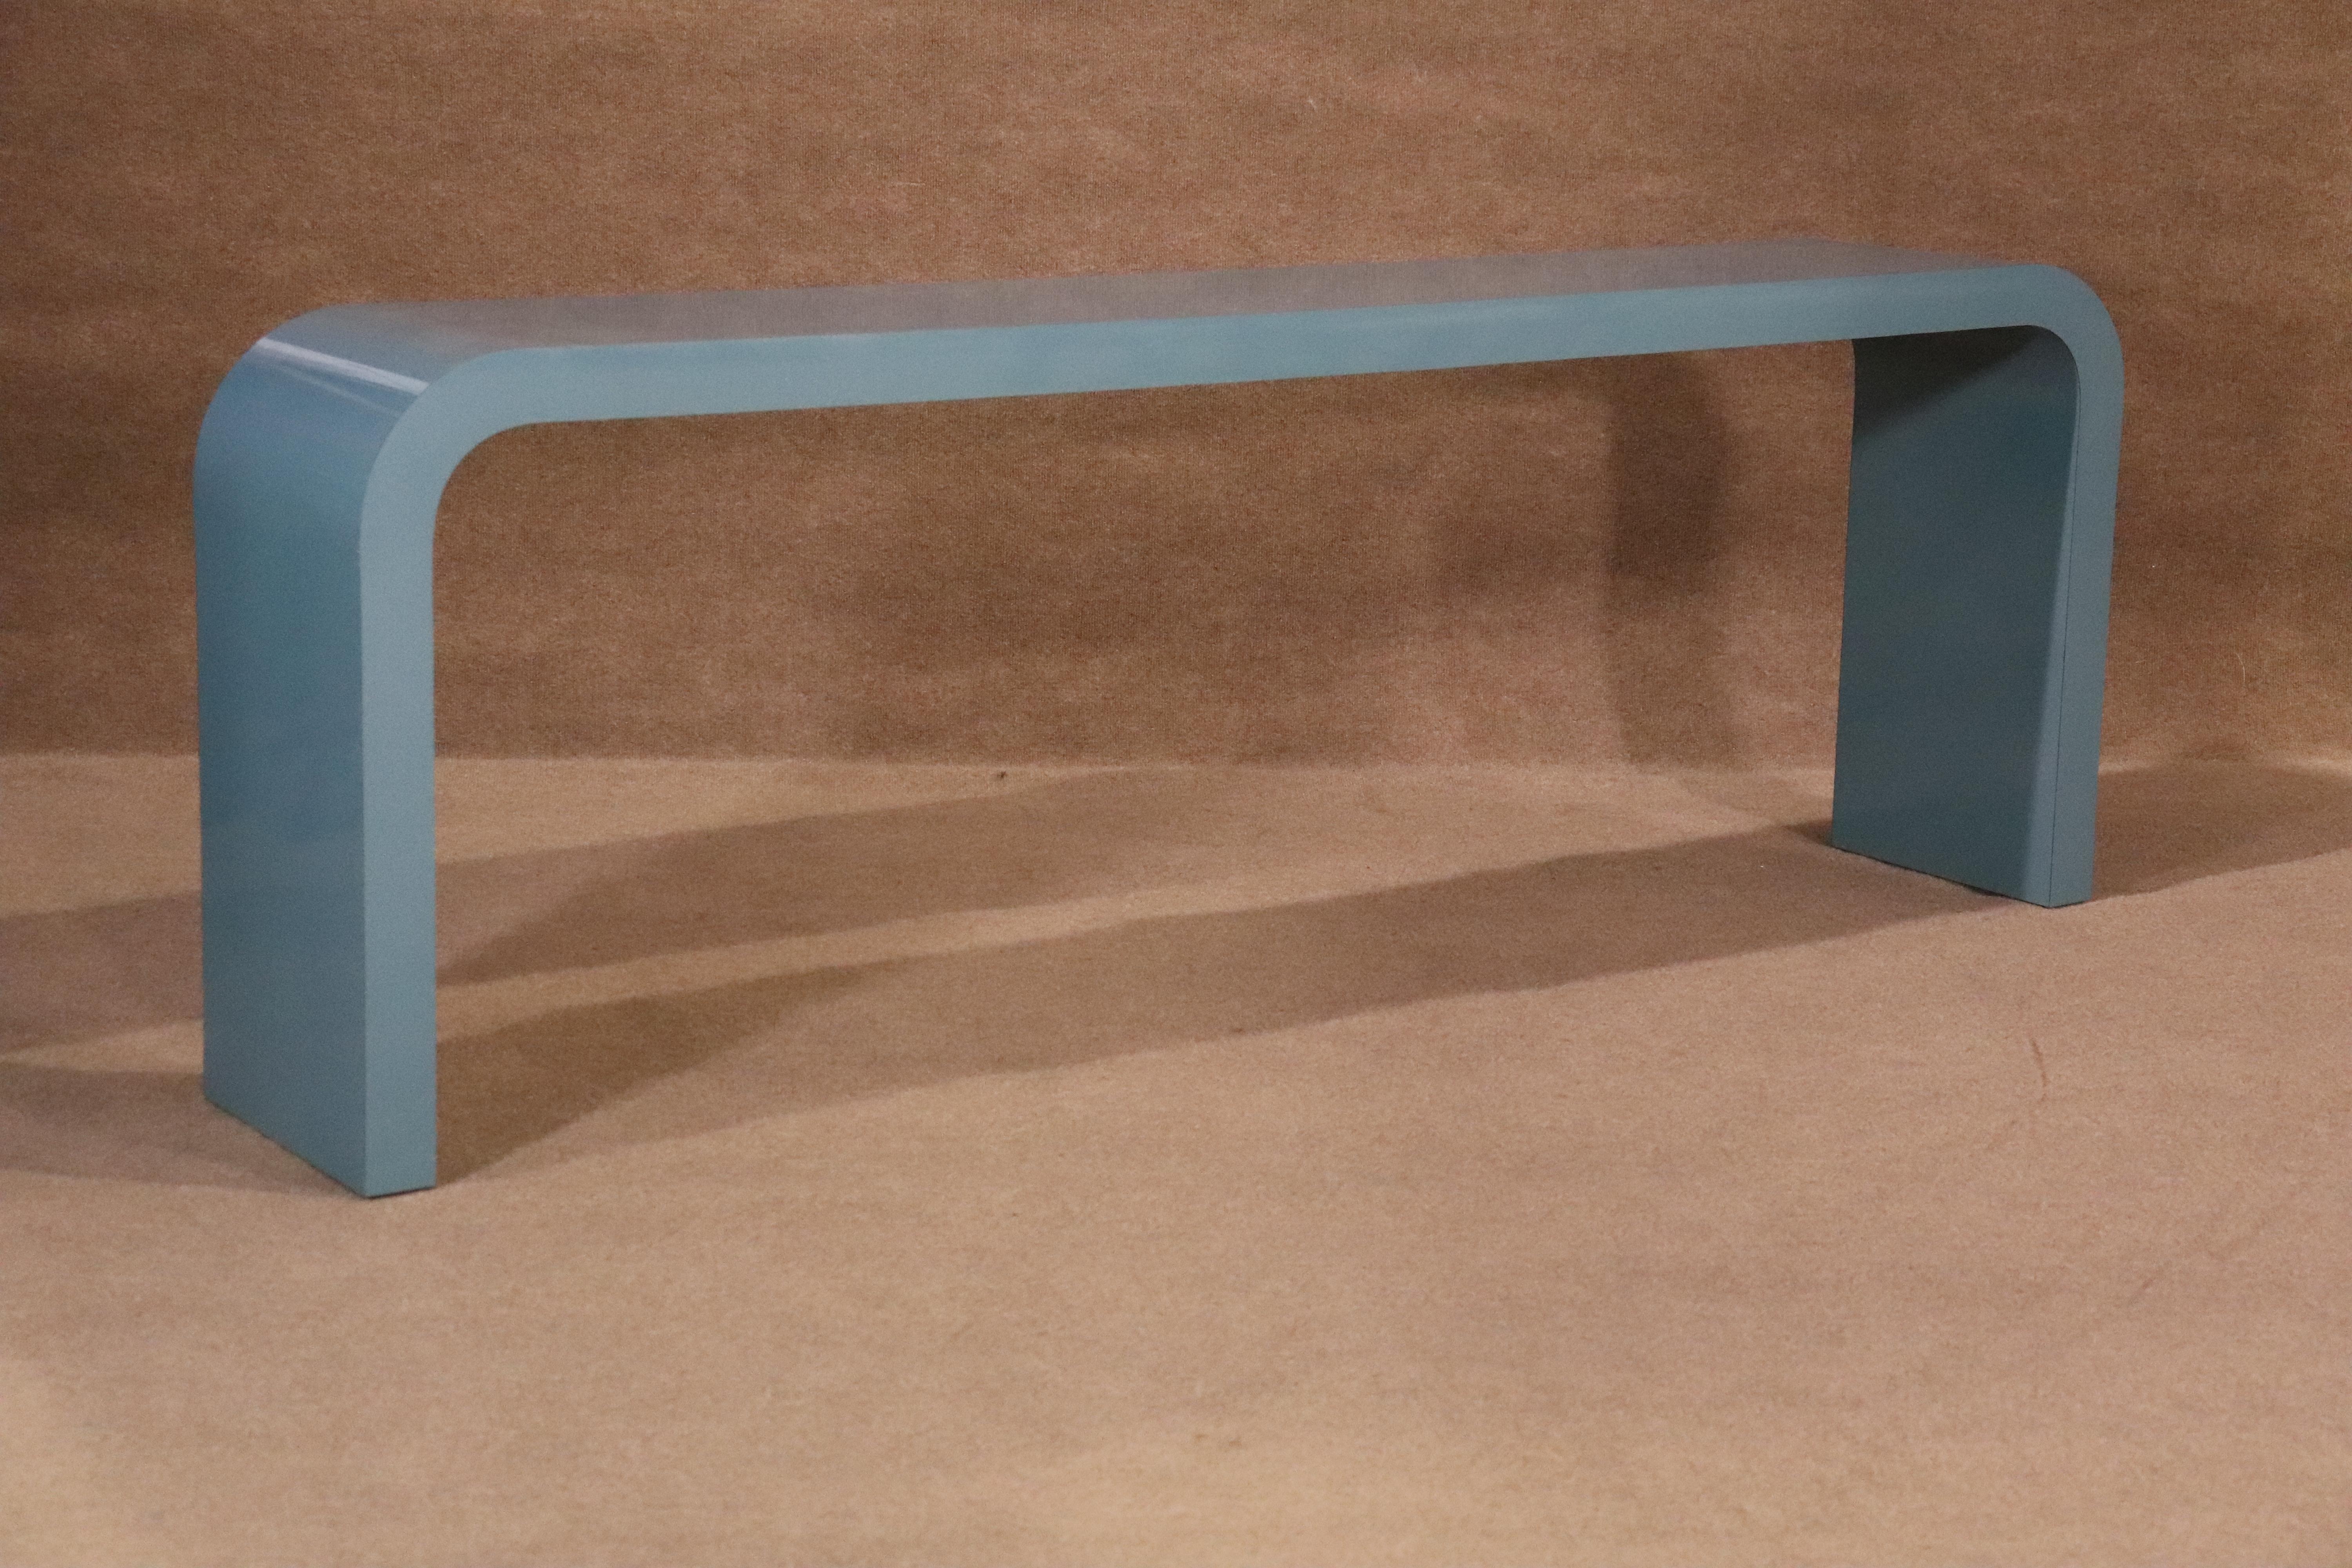 Long mid-century modern simple console table with a flowing line down to the legs. Great for an entry way or behind a sofa.
Please confirm location NY or NJ